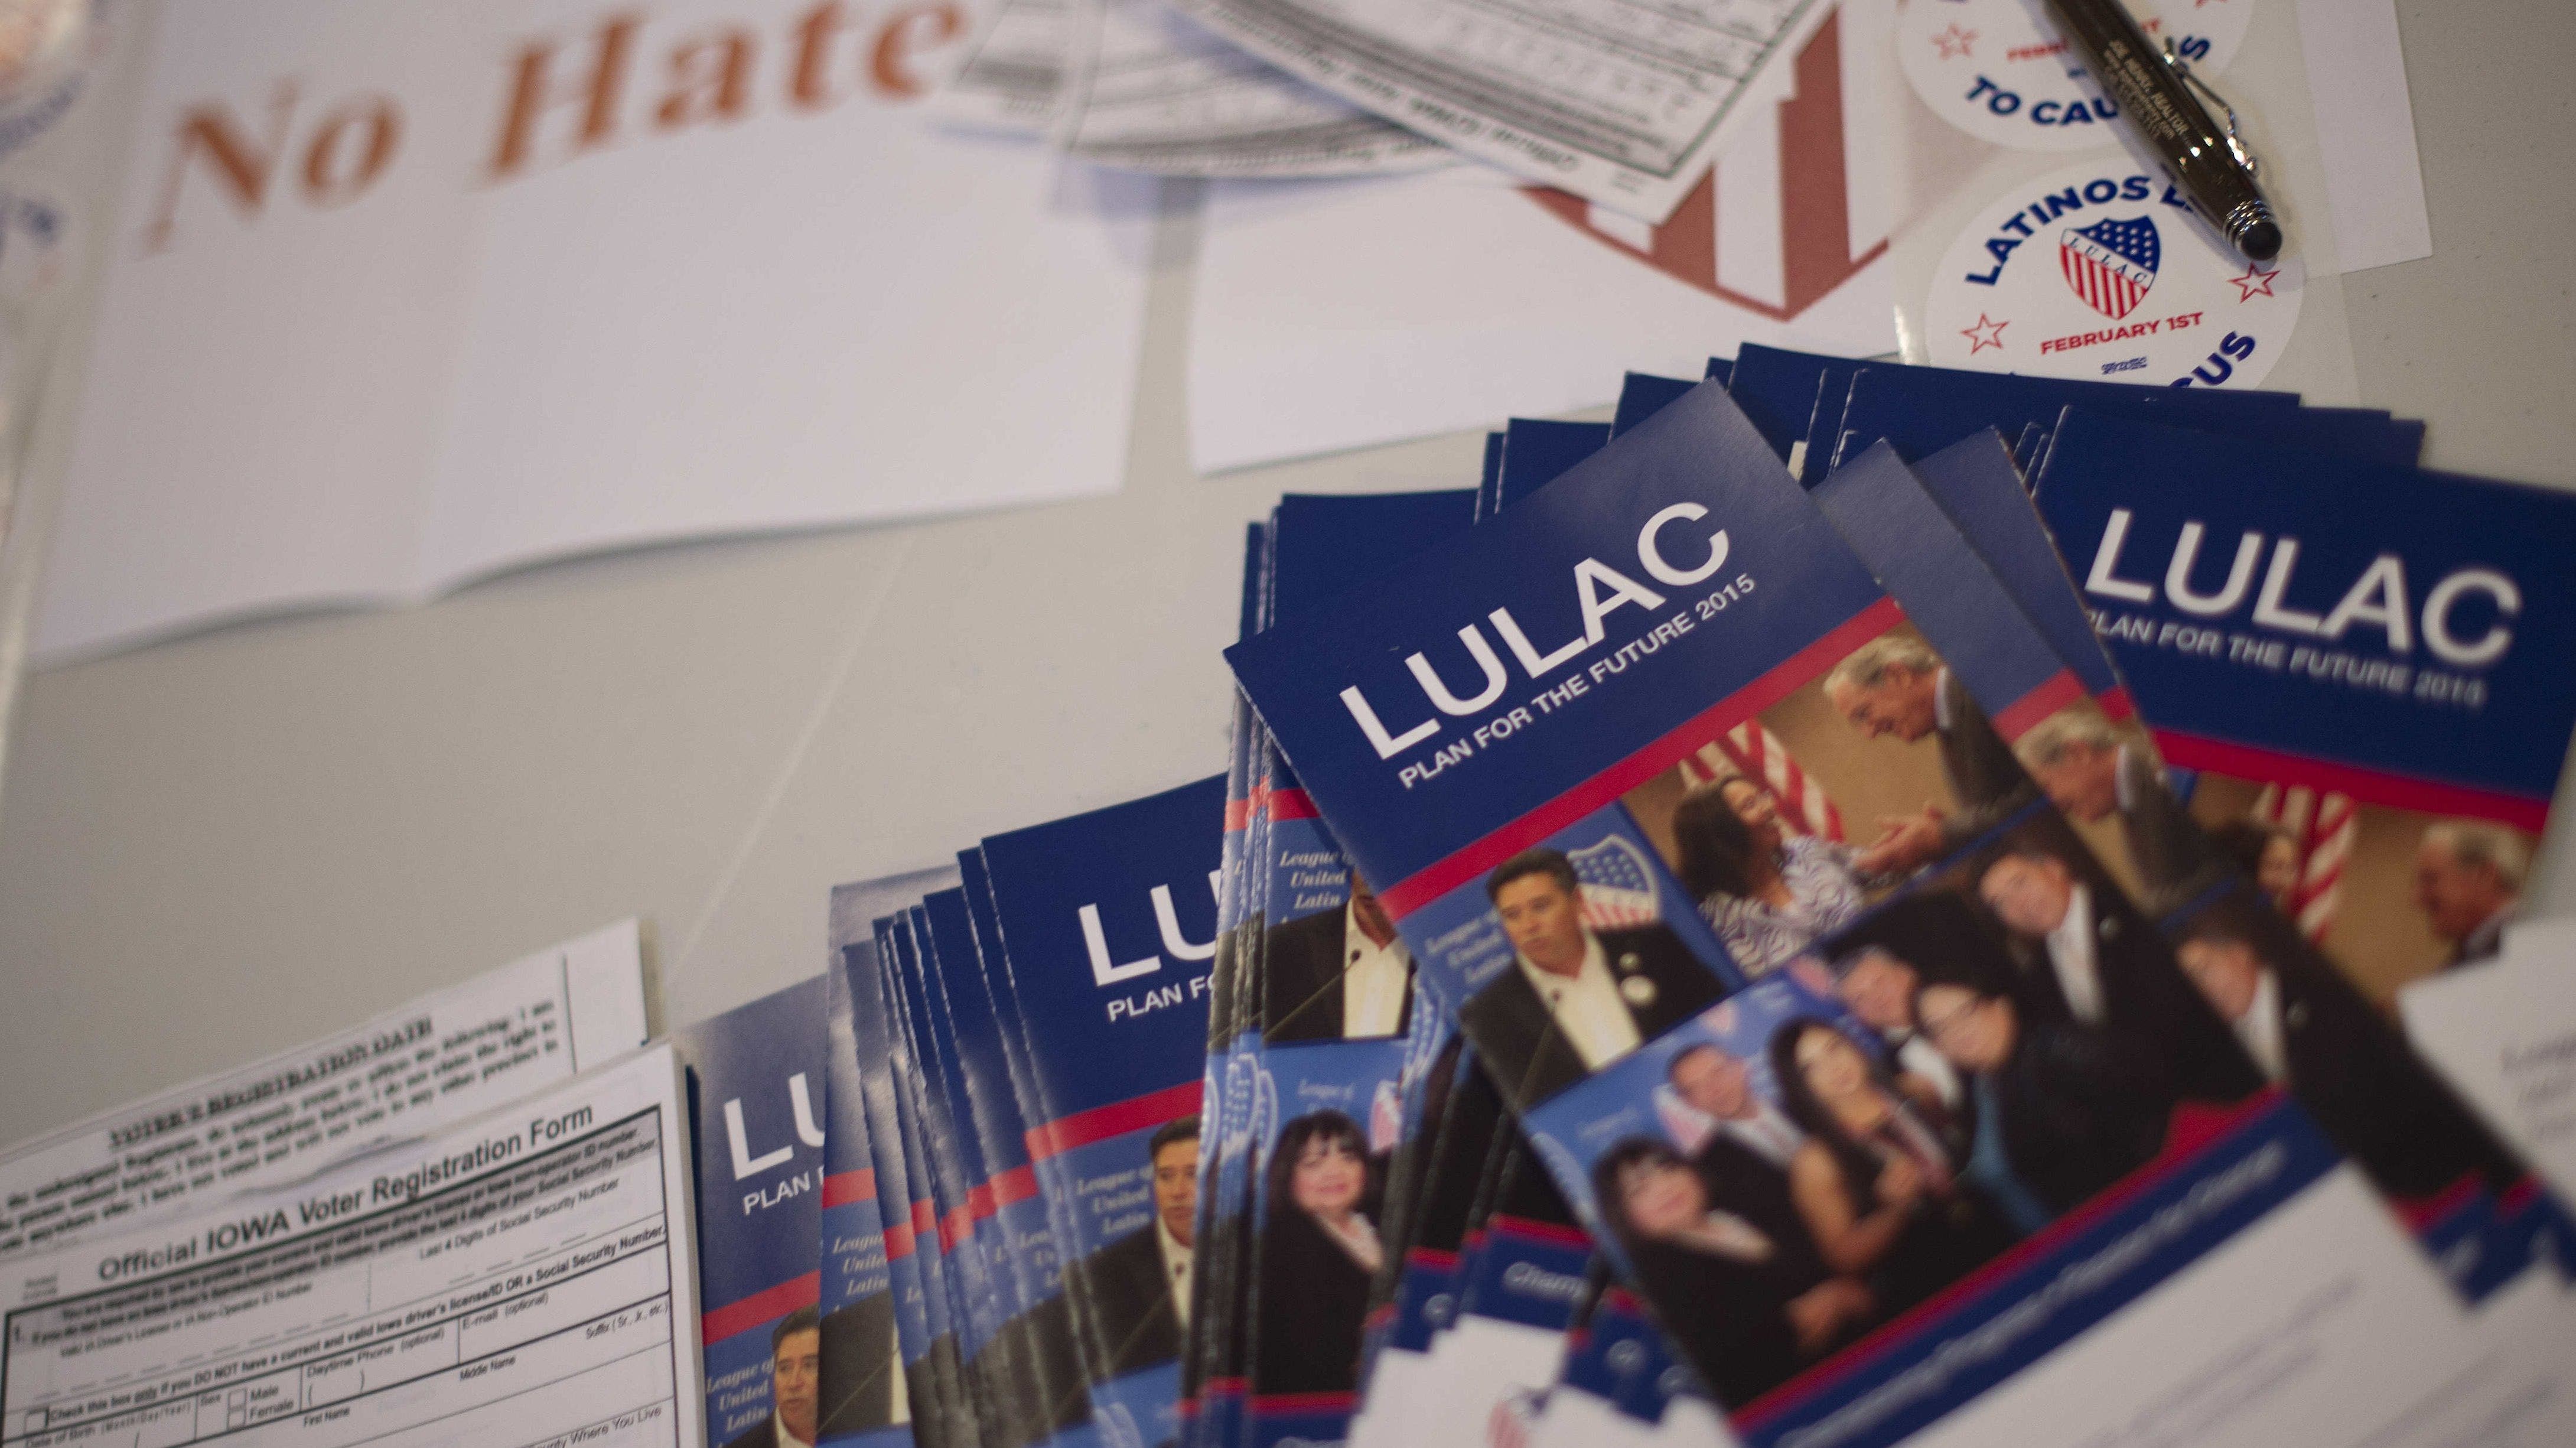 LULAC sues Iowa officials over 'failure' to provide non-English election materials